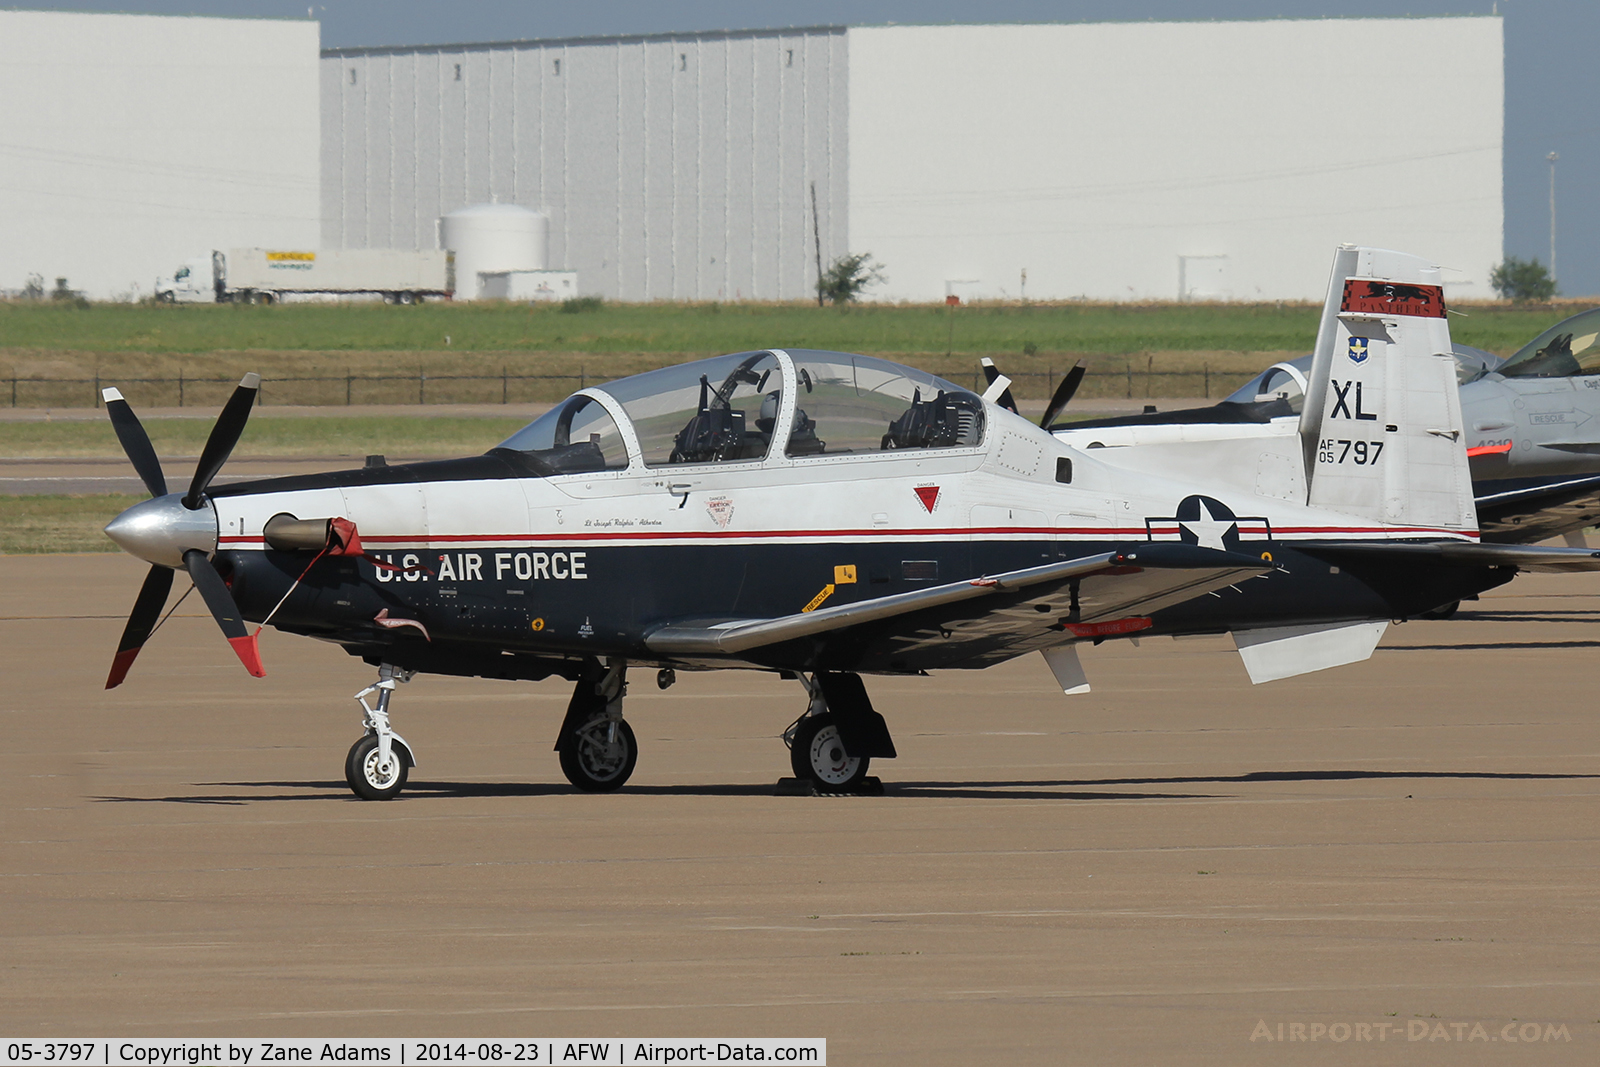 05-3797, 2005 Raytheon T-6A Texan II C/N PT-349, On the ramp at Alliance Airport - Fort Worth, TX